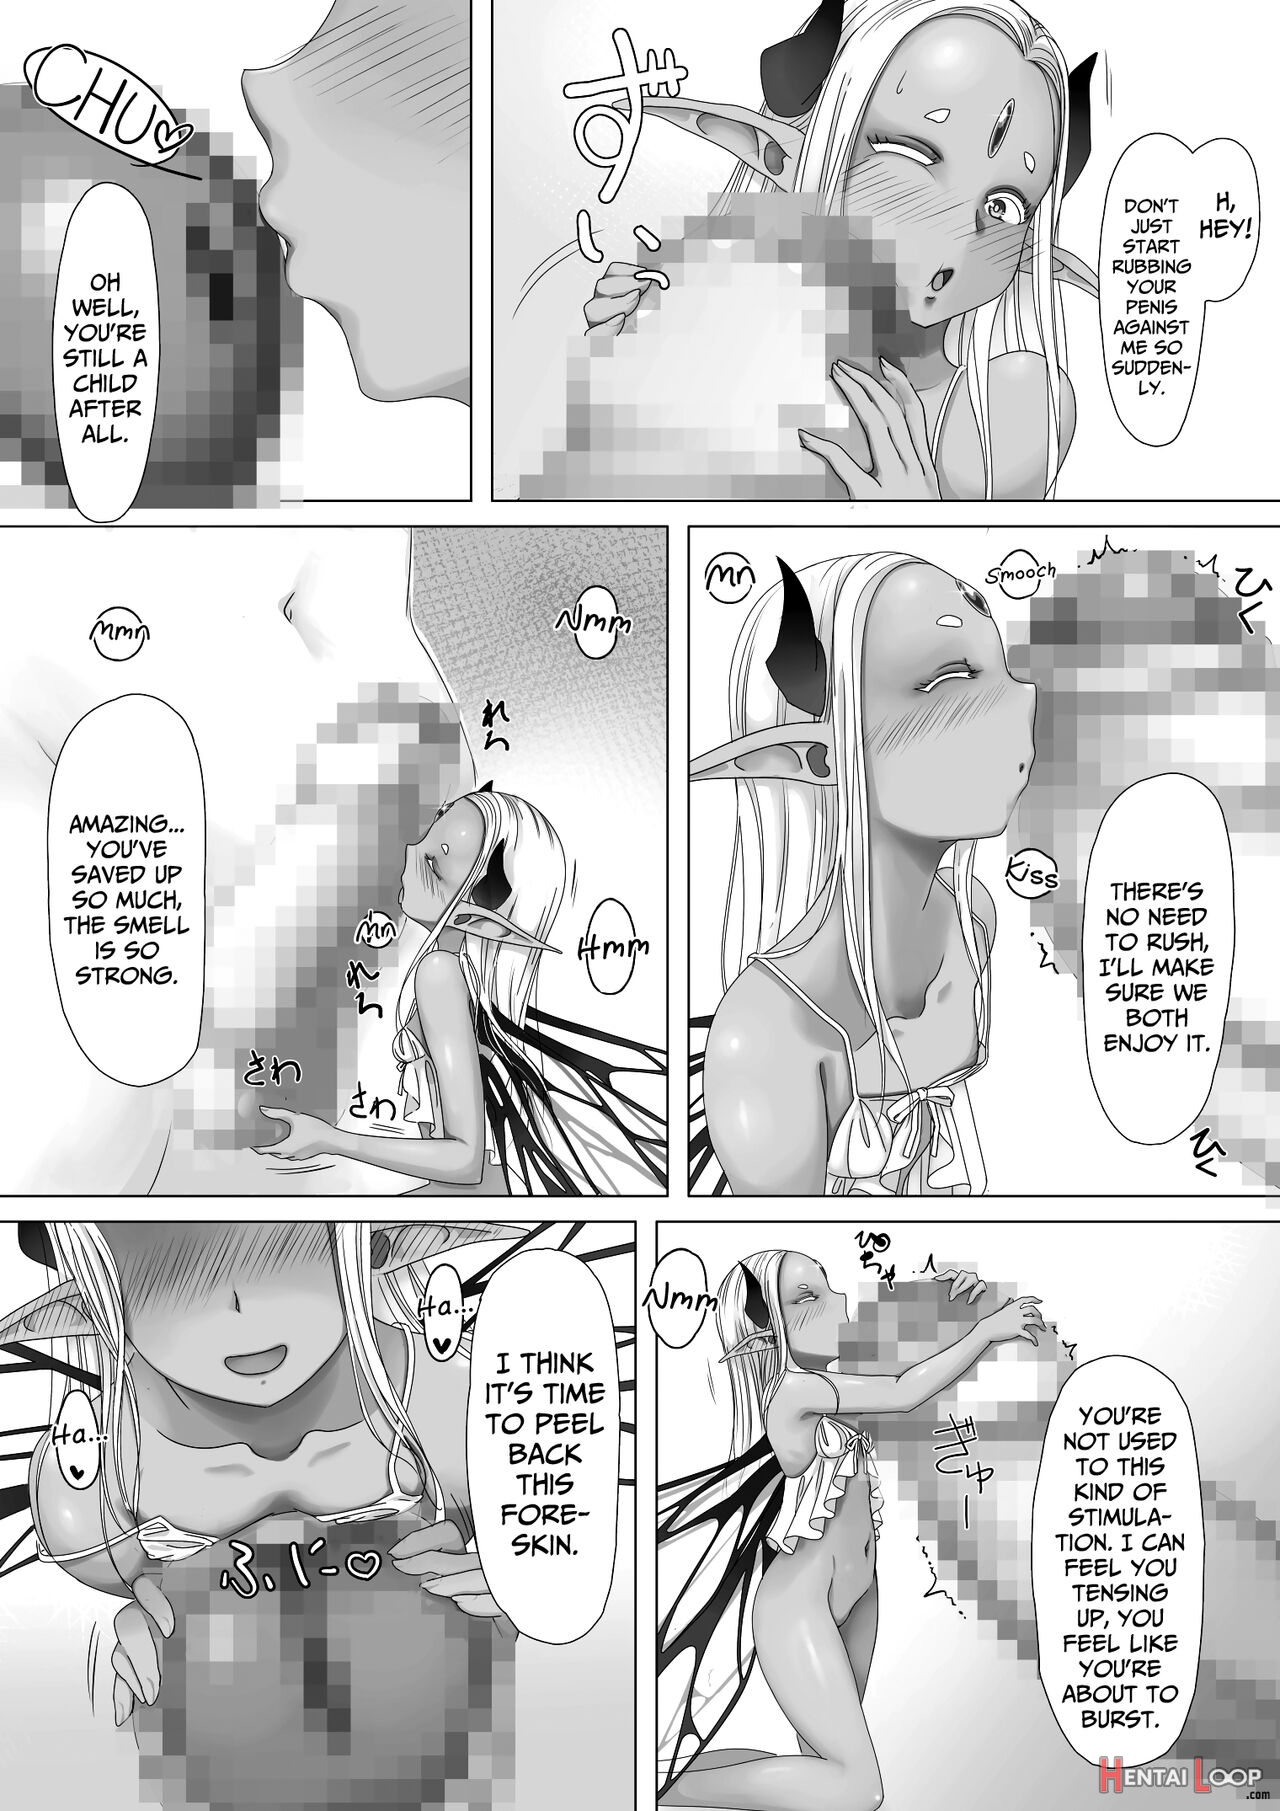 the Story Of A Fairy Mother Mating With Her Son Until She's Pregnant With His Child page 8